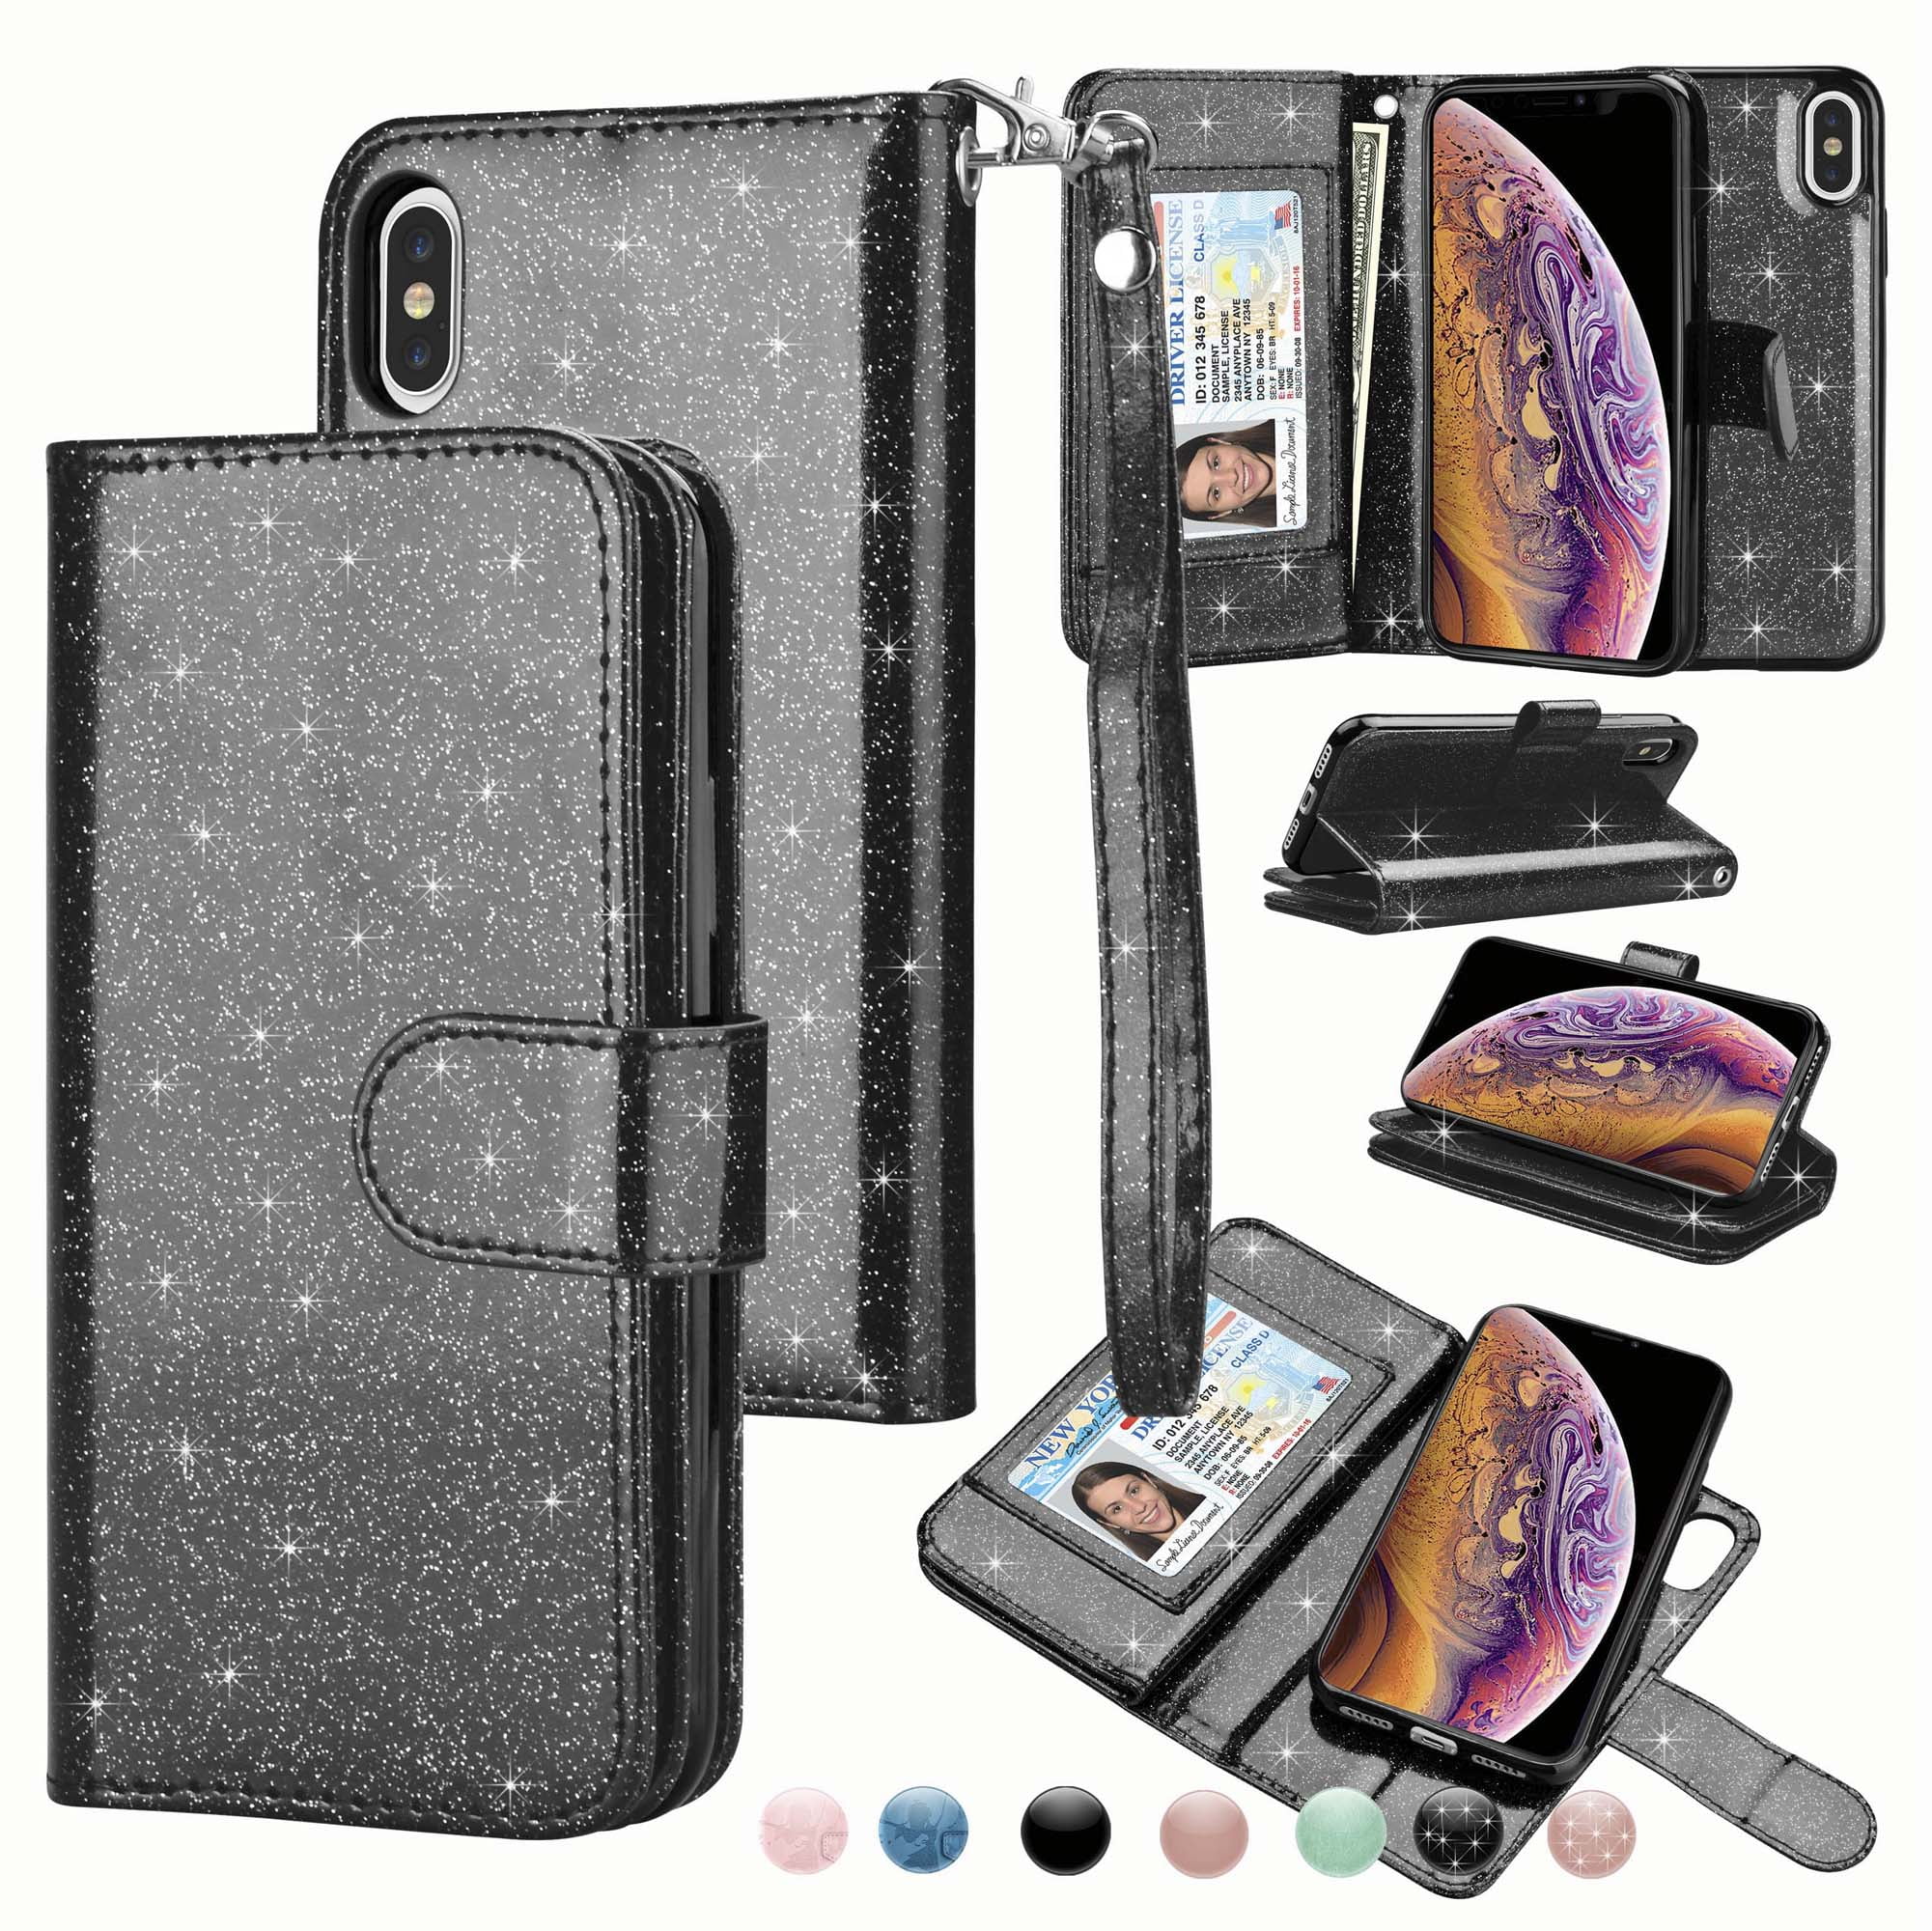 Black PU Leather Wallet Cover Compatible with iPhone Xs Max Flip Case for iPhone Xs Max 